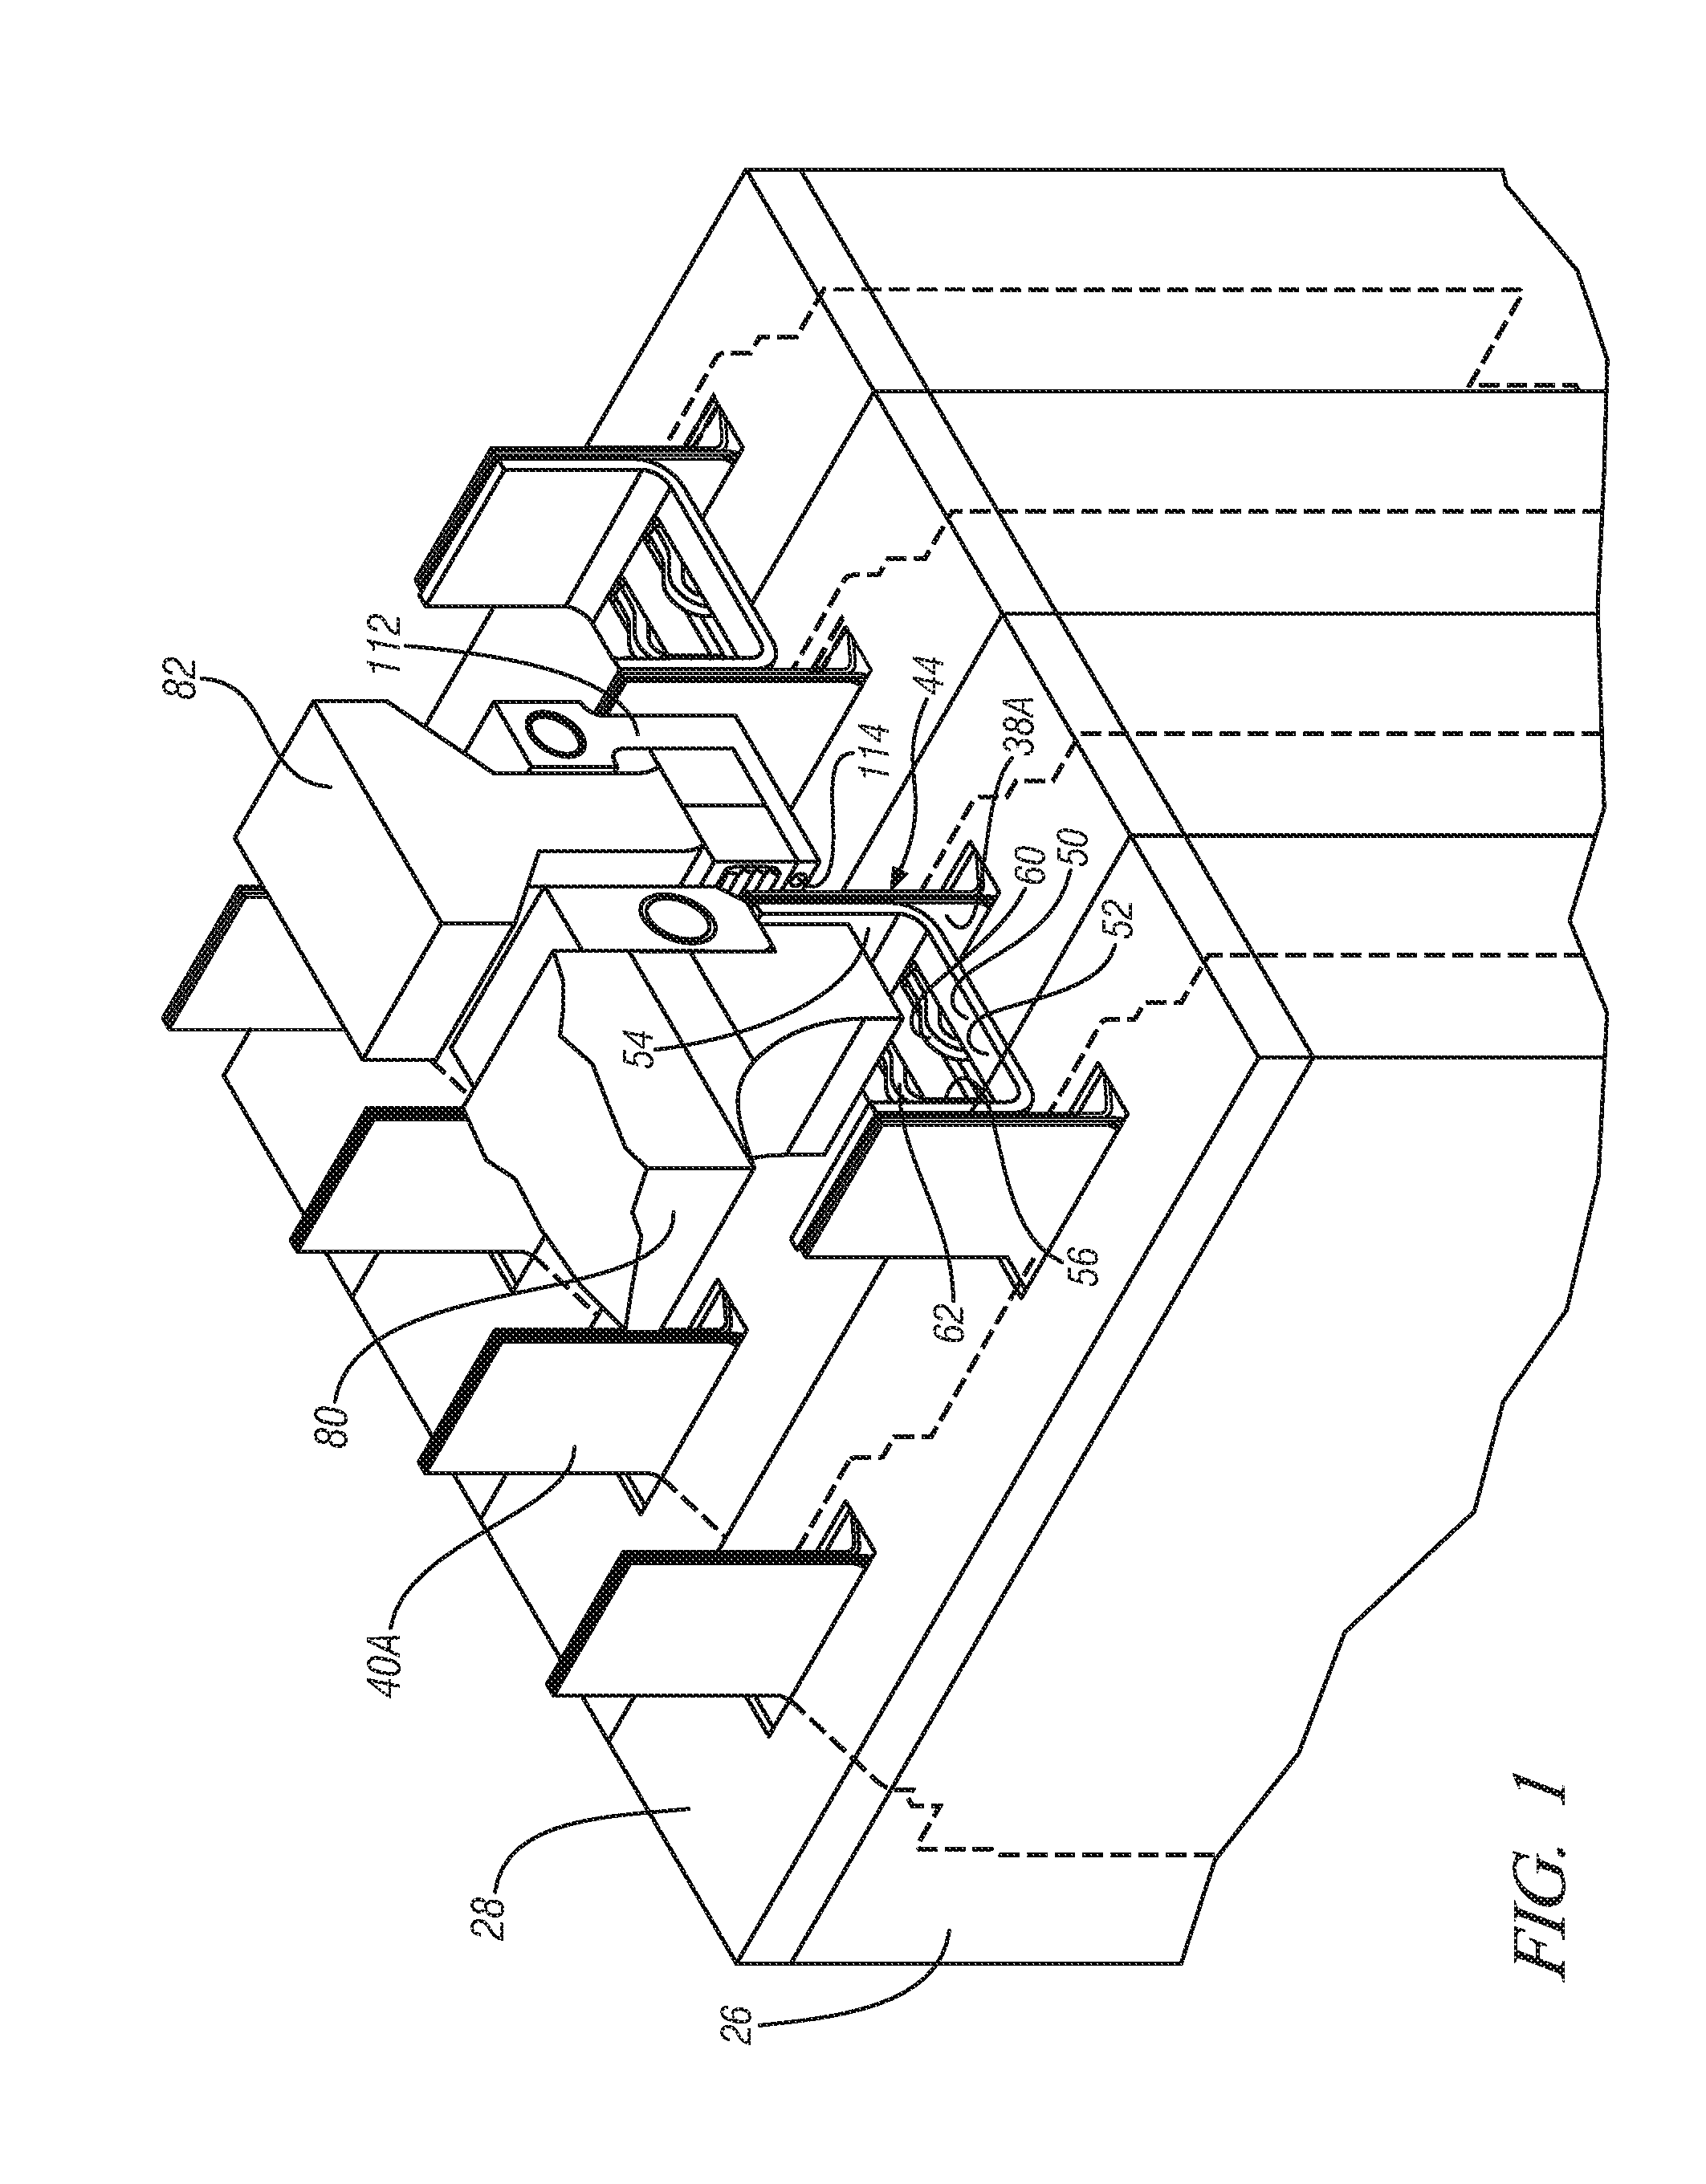 Method and Apparatus for Ultrasonic Welding of Terminals